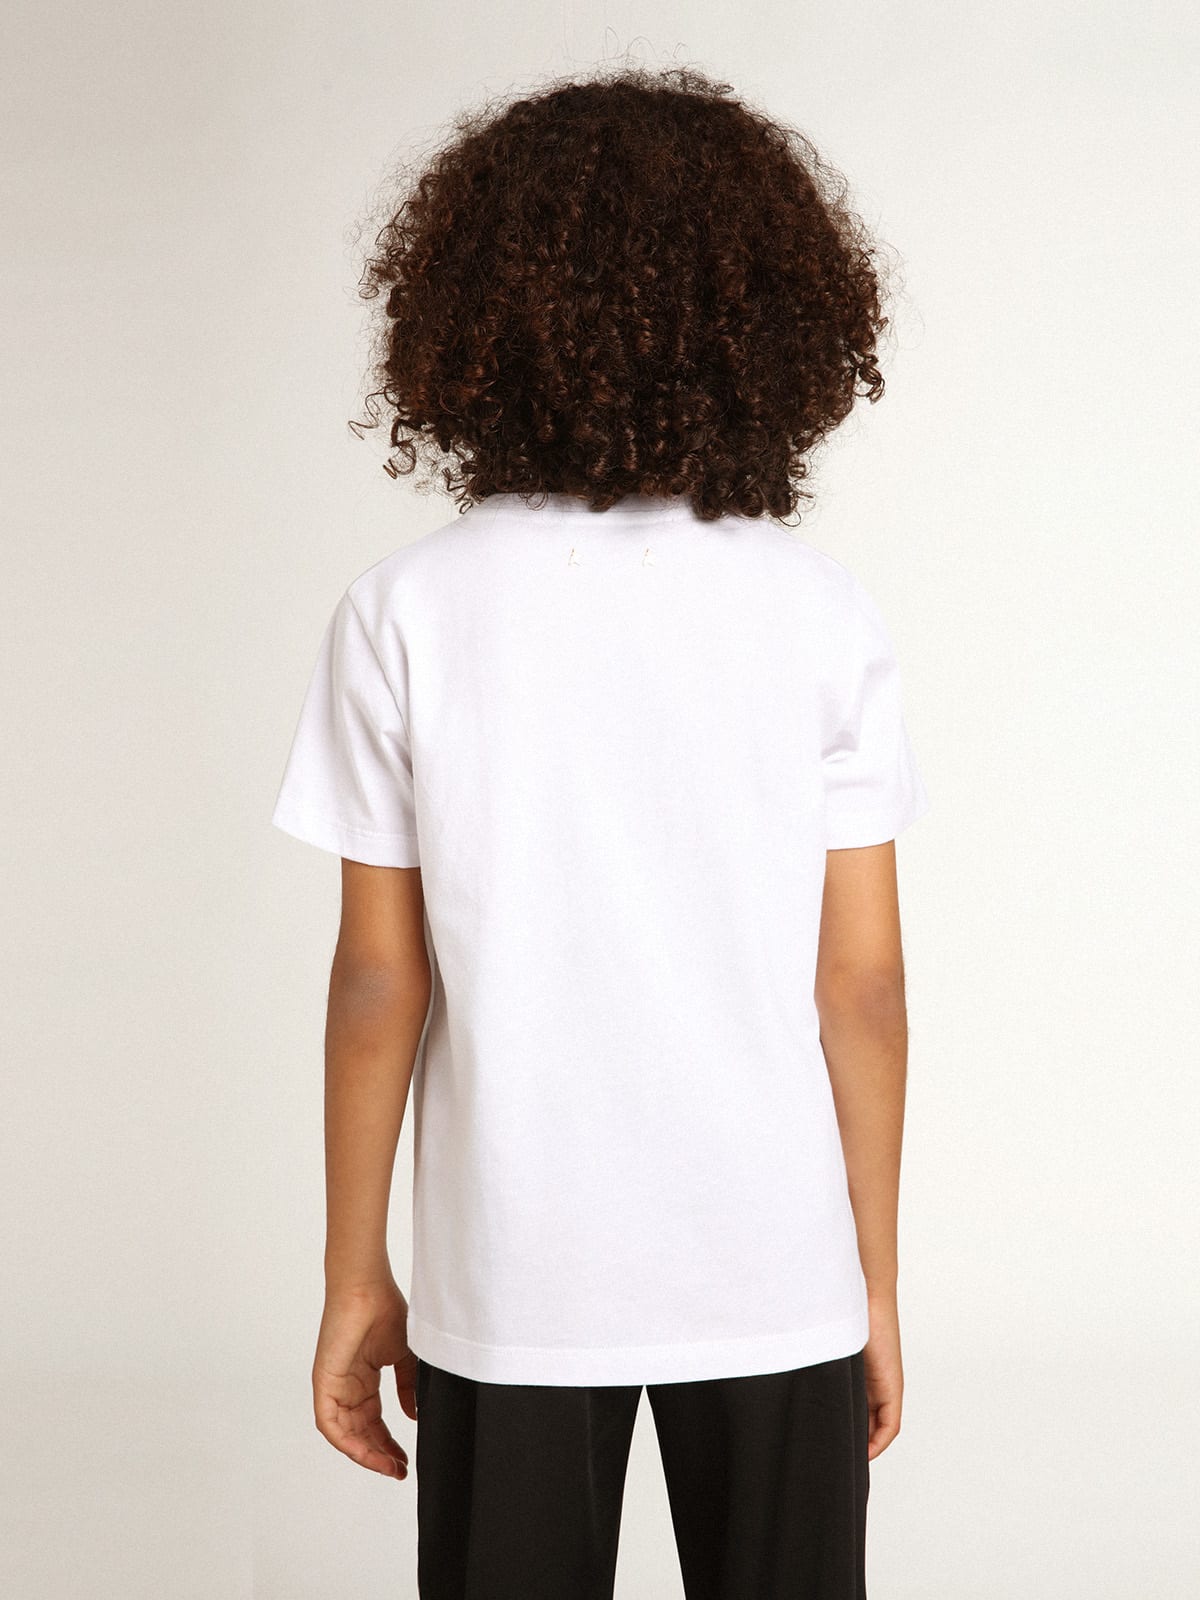 Golden Goose - Boys’ white T-shirt with printed red logo in the center in 